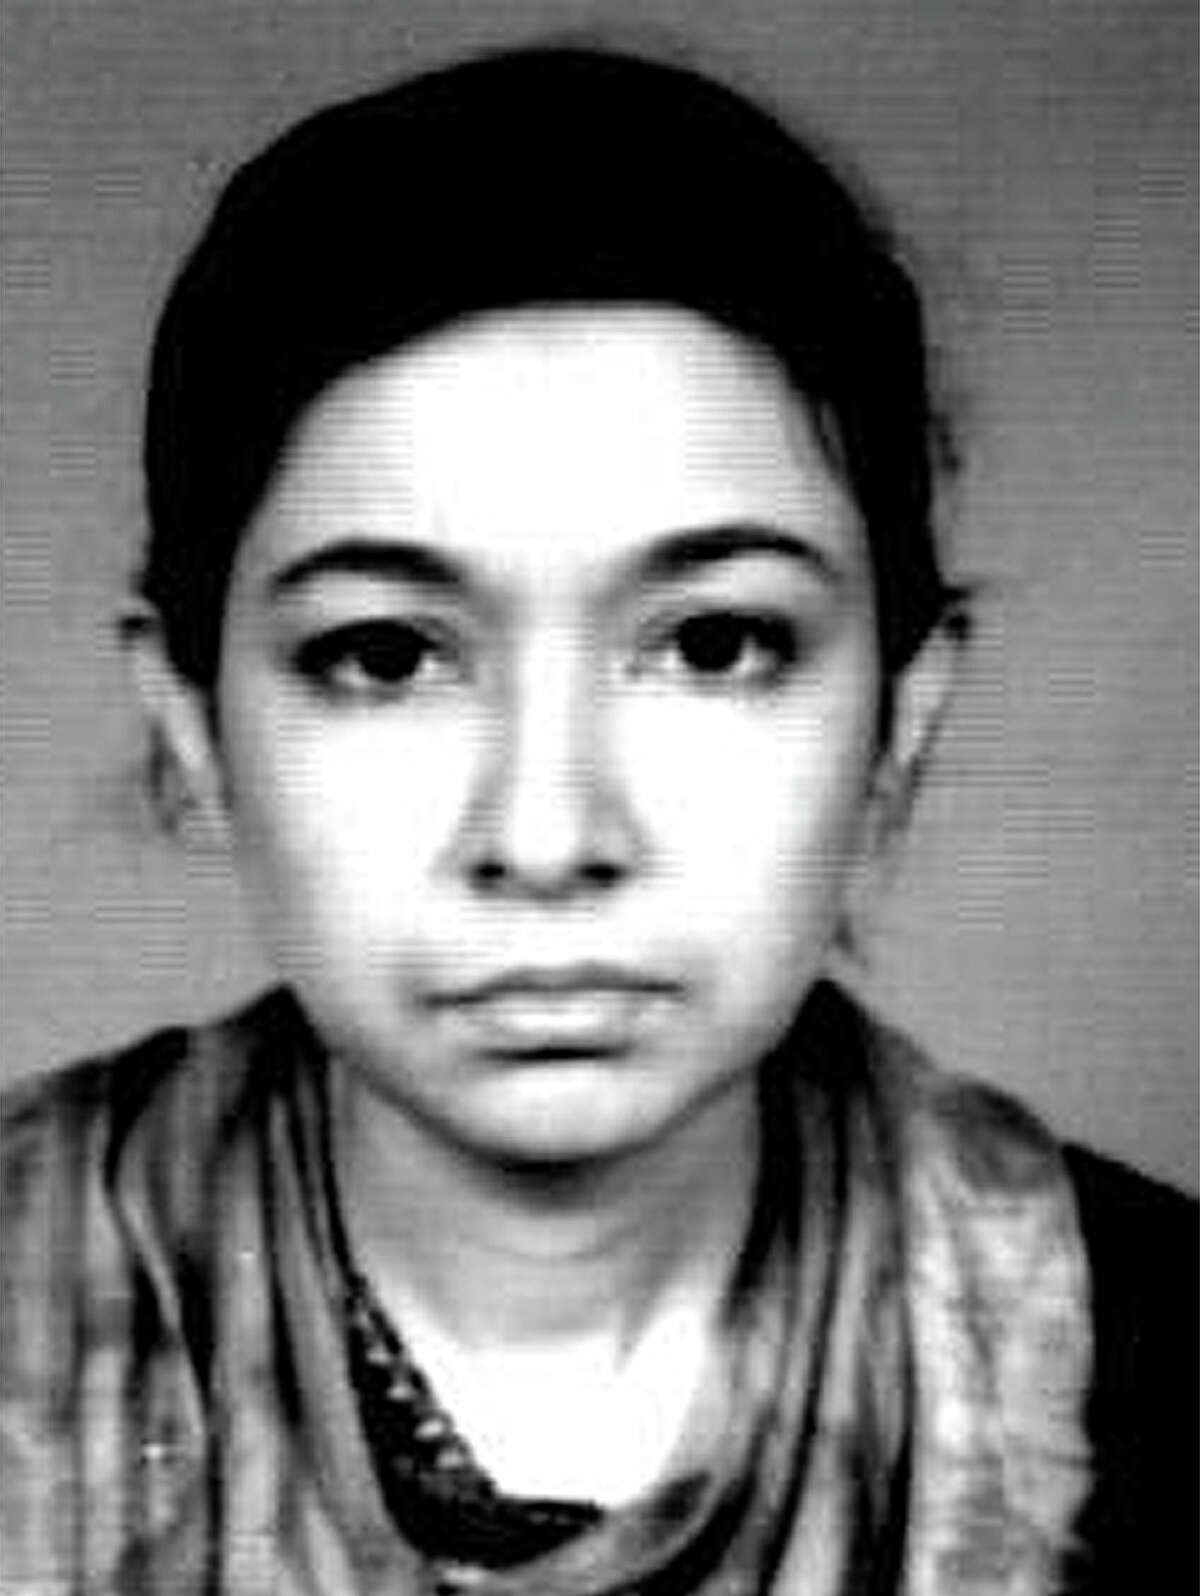 1.  Aafia Siddiqui is known as Al-Qaeda’s highest-ranking female associate. She weighed 90 pounds and stood 5'4" at the time of arraignment.